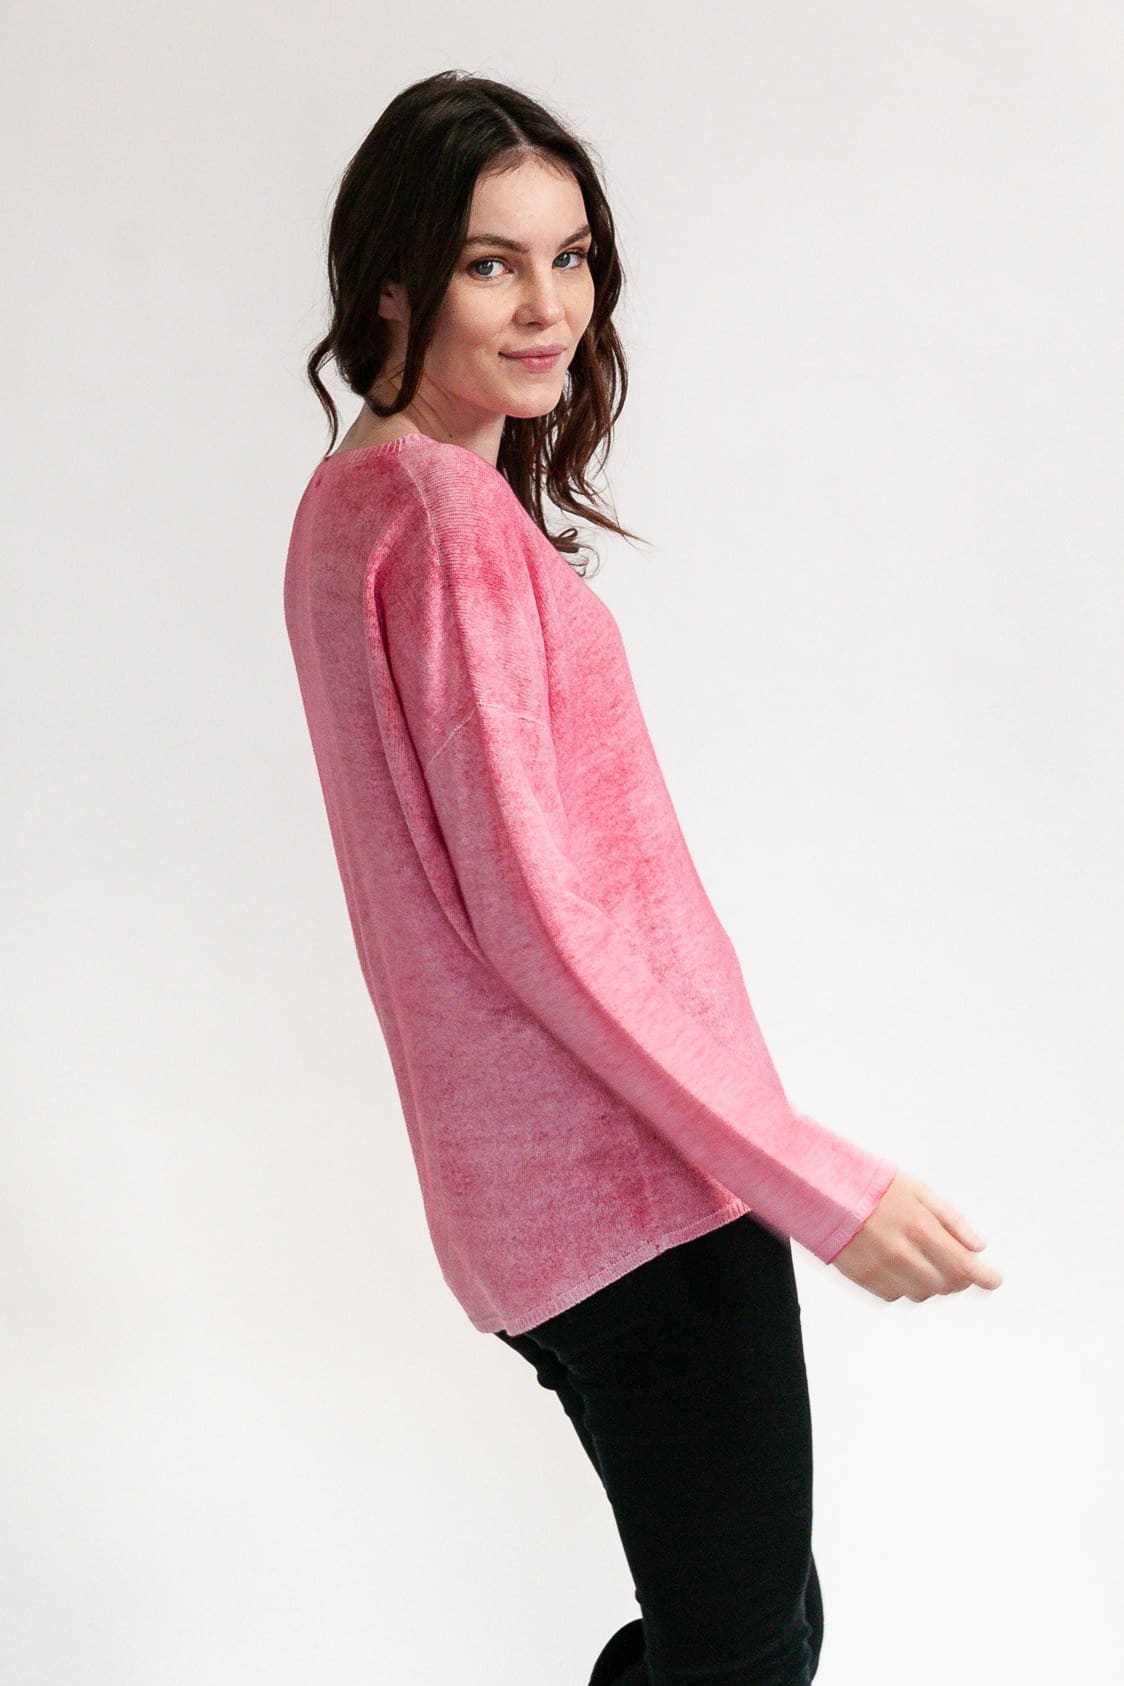 Dalby Cashmere - Cherry - Sweaters